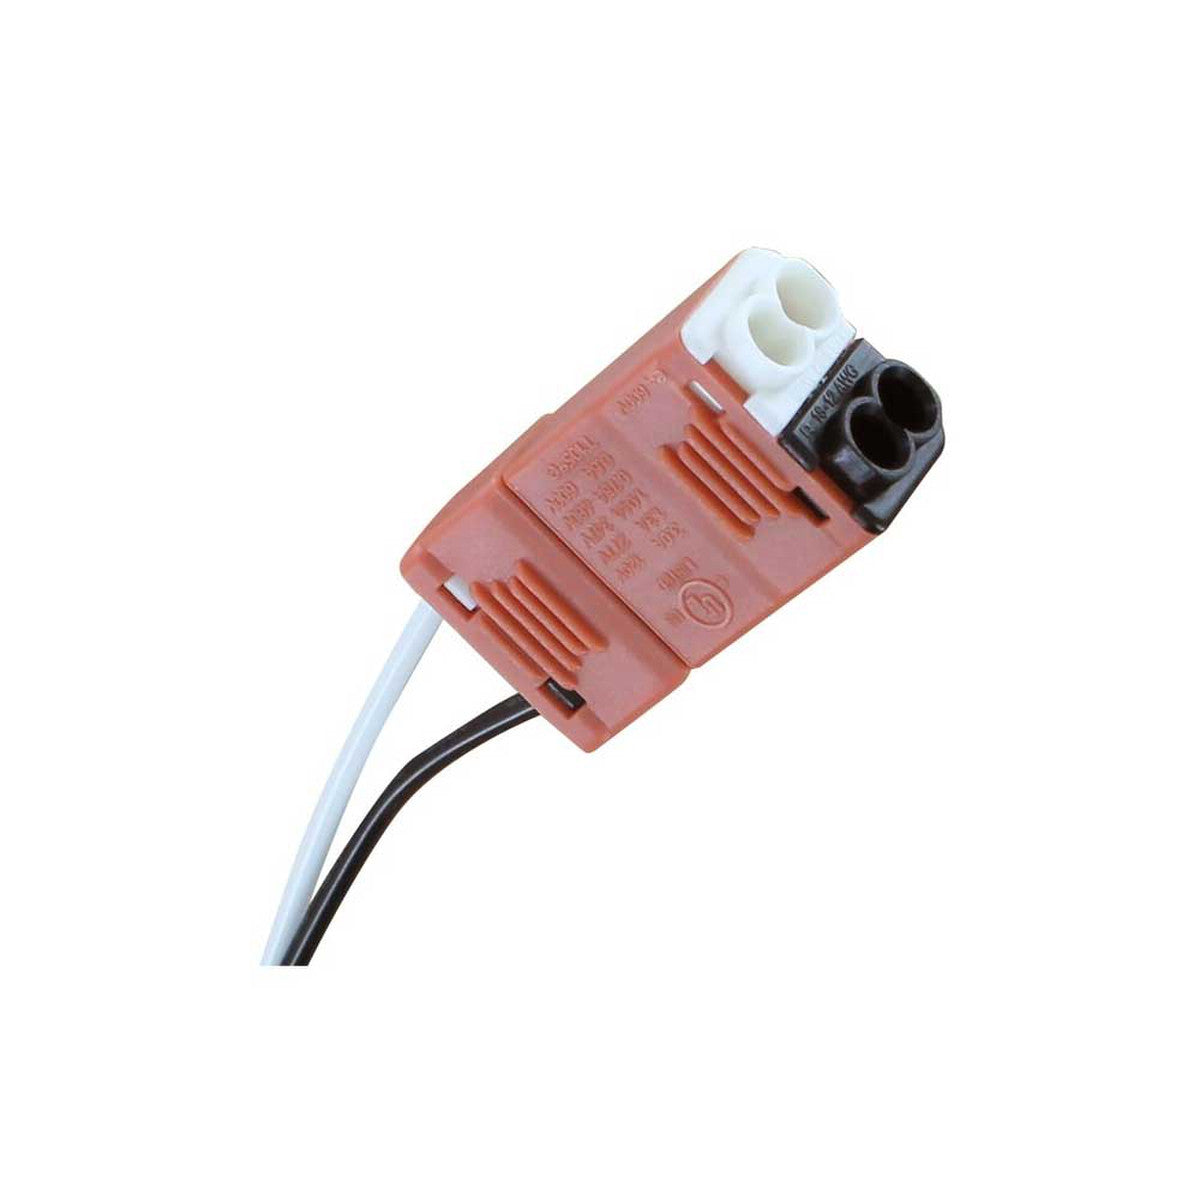 GLT GLT-SOCKET-T8-U-T-4-W 4-Lamp Wiring Harness with Tall Non-shunted Sockets for LED Tubes